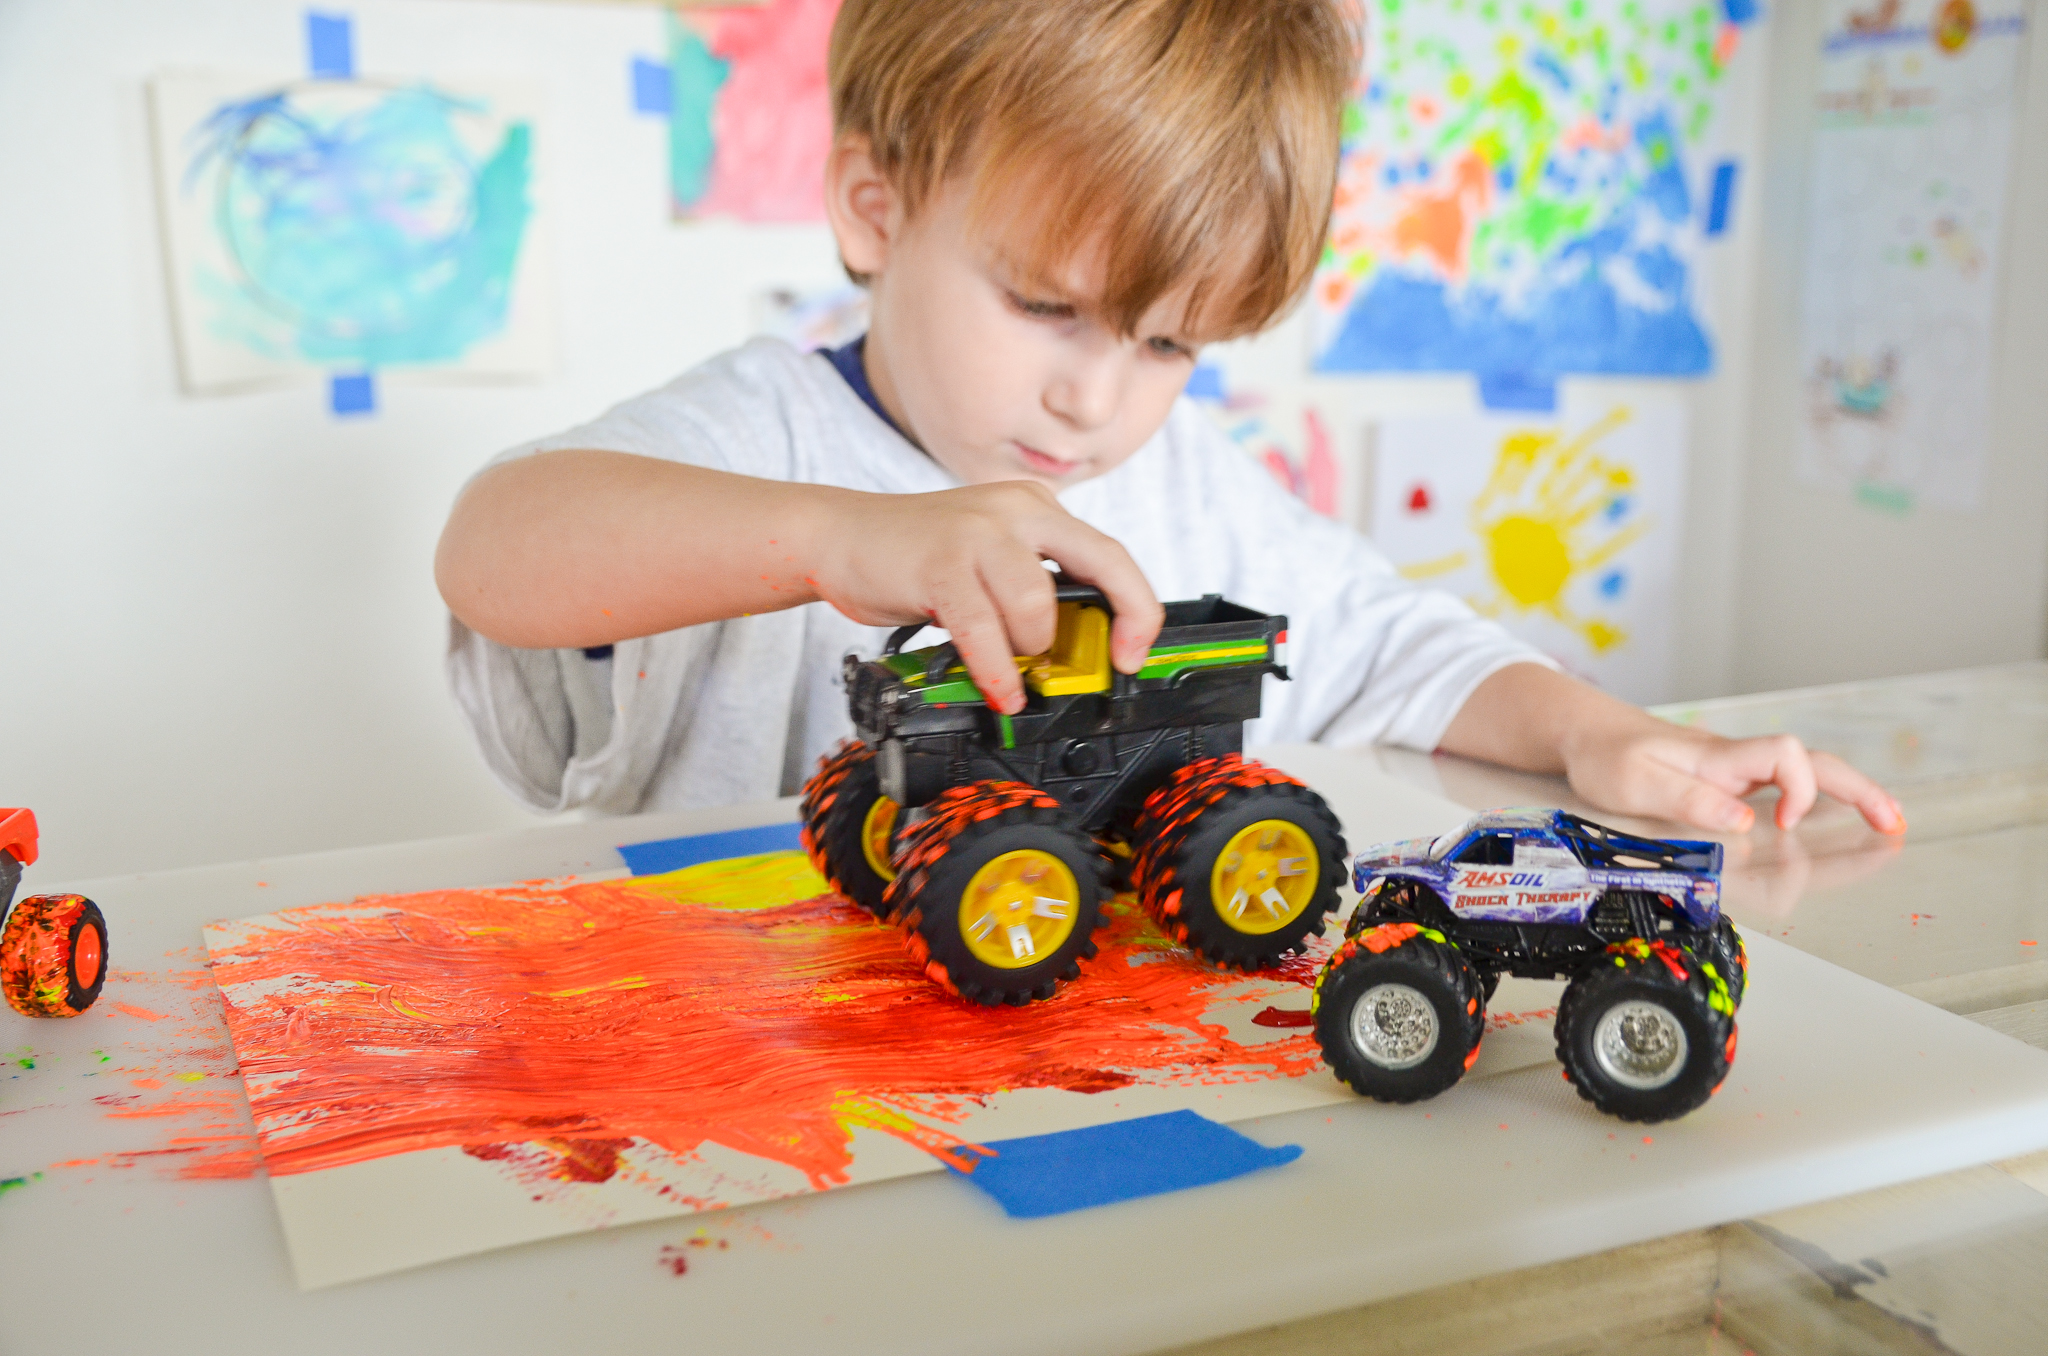 Tips for Painting with Toddlers